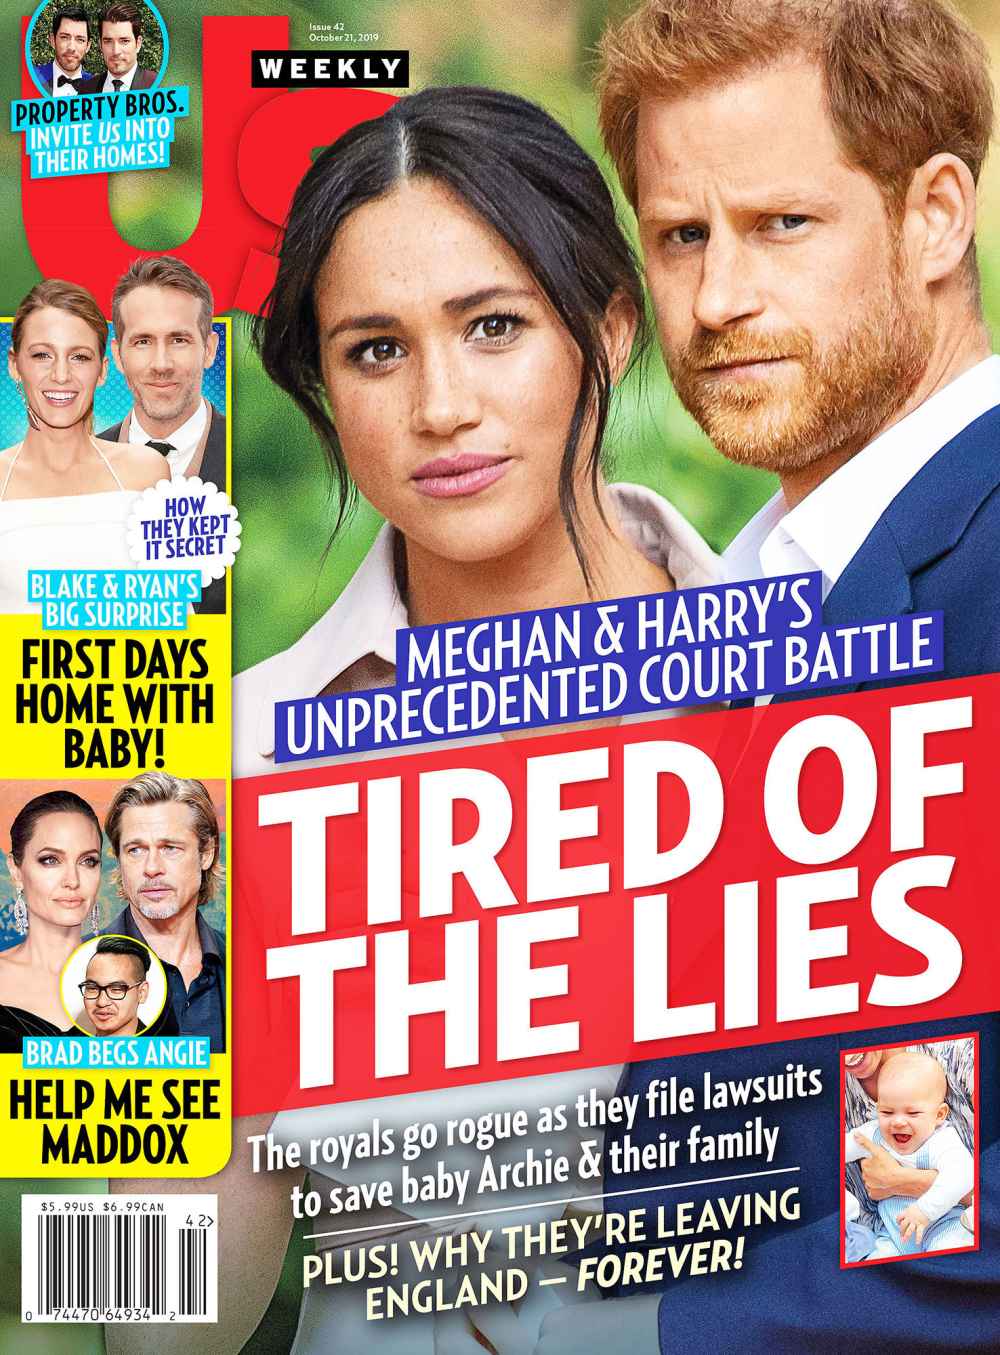 Us Weekly Cover Issue 4219 Rihanna's Boyfriend Hassan Jameel Is Very Smart and Serious